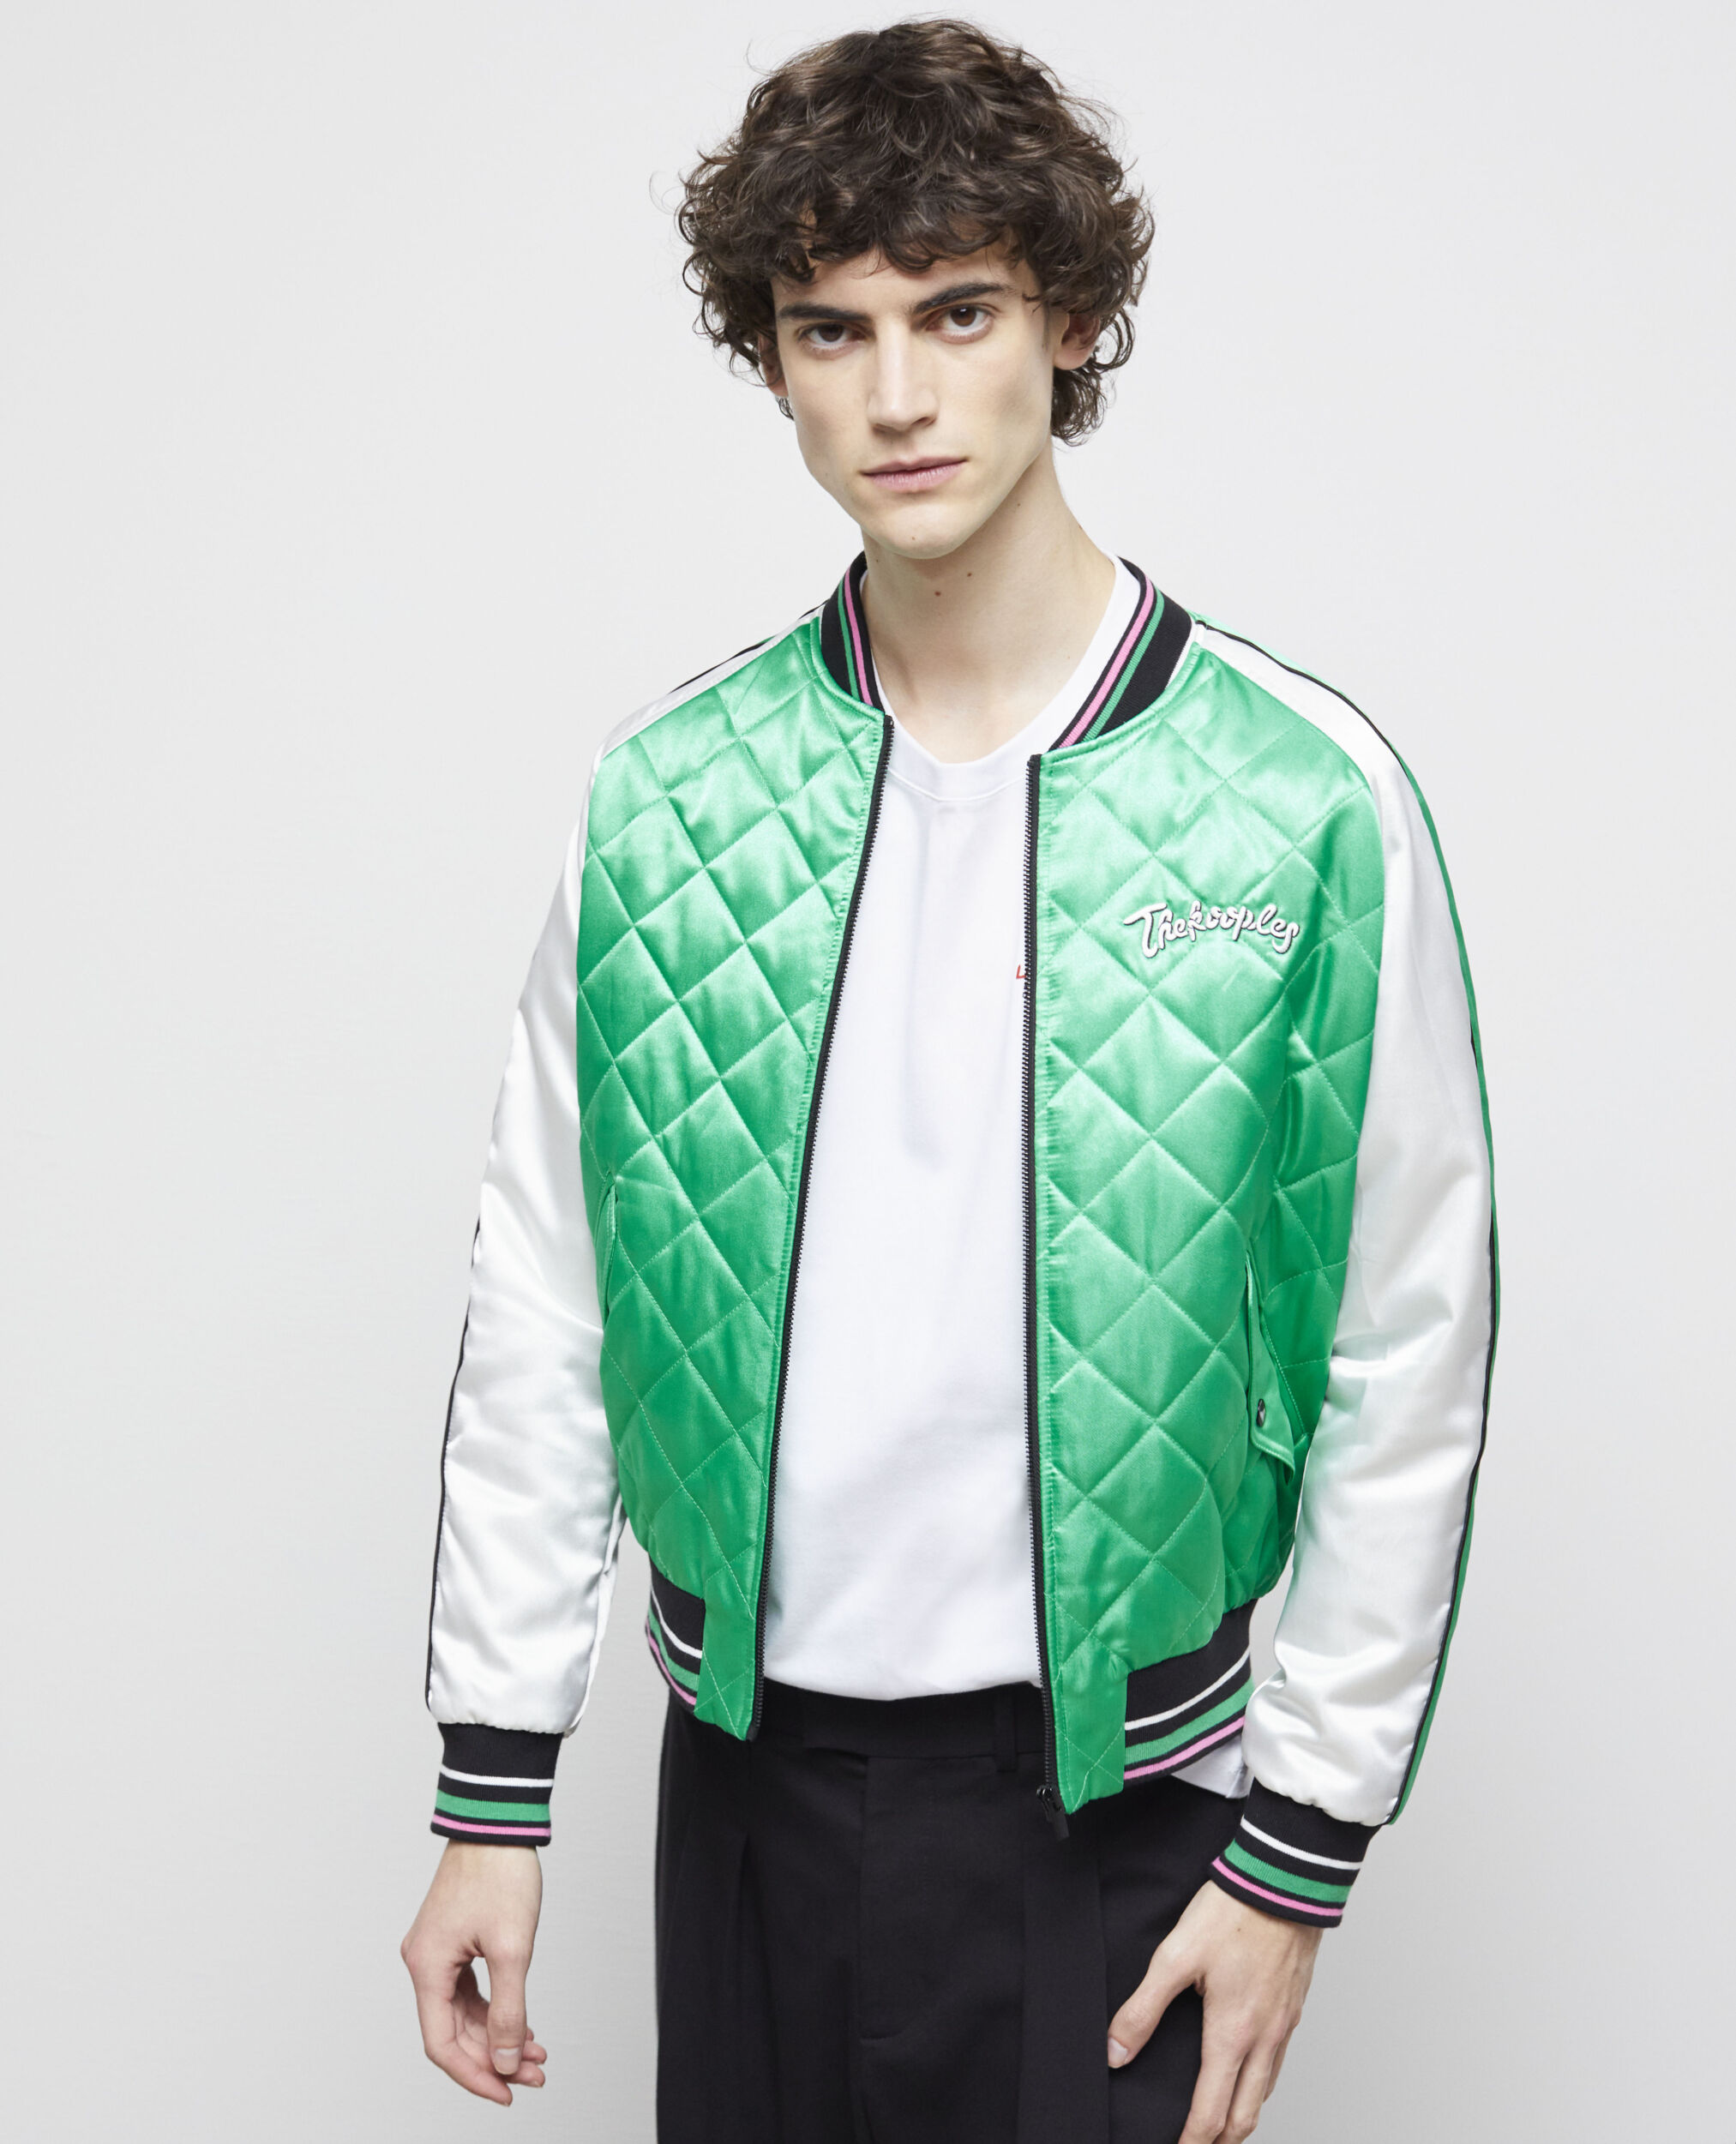 Blouson Teddy bicolore avec broderies, GREEN-WHITE, hi-res image number null